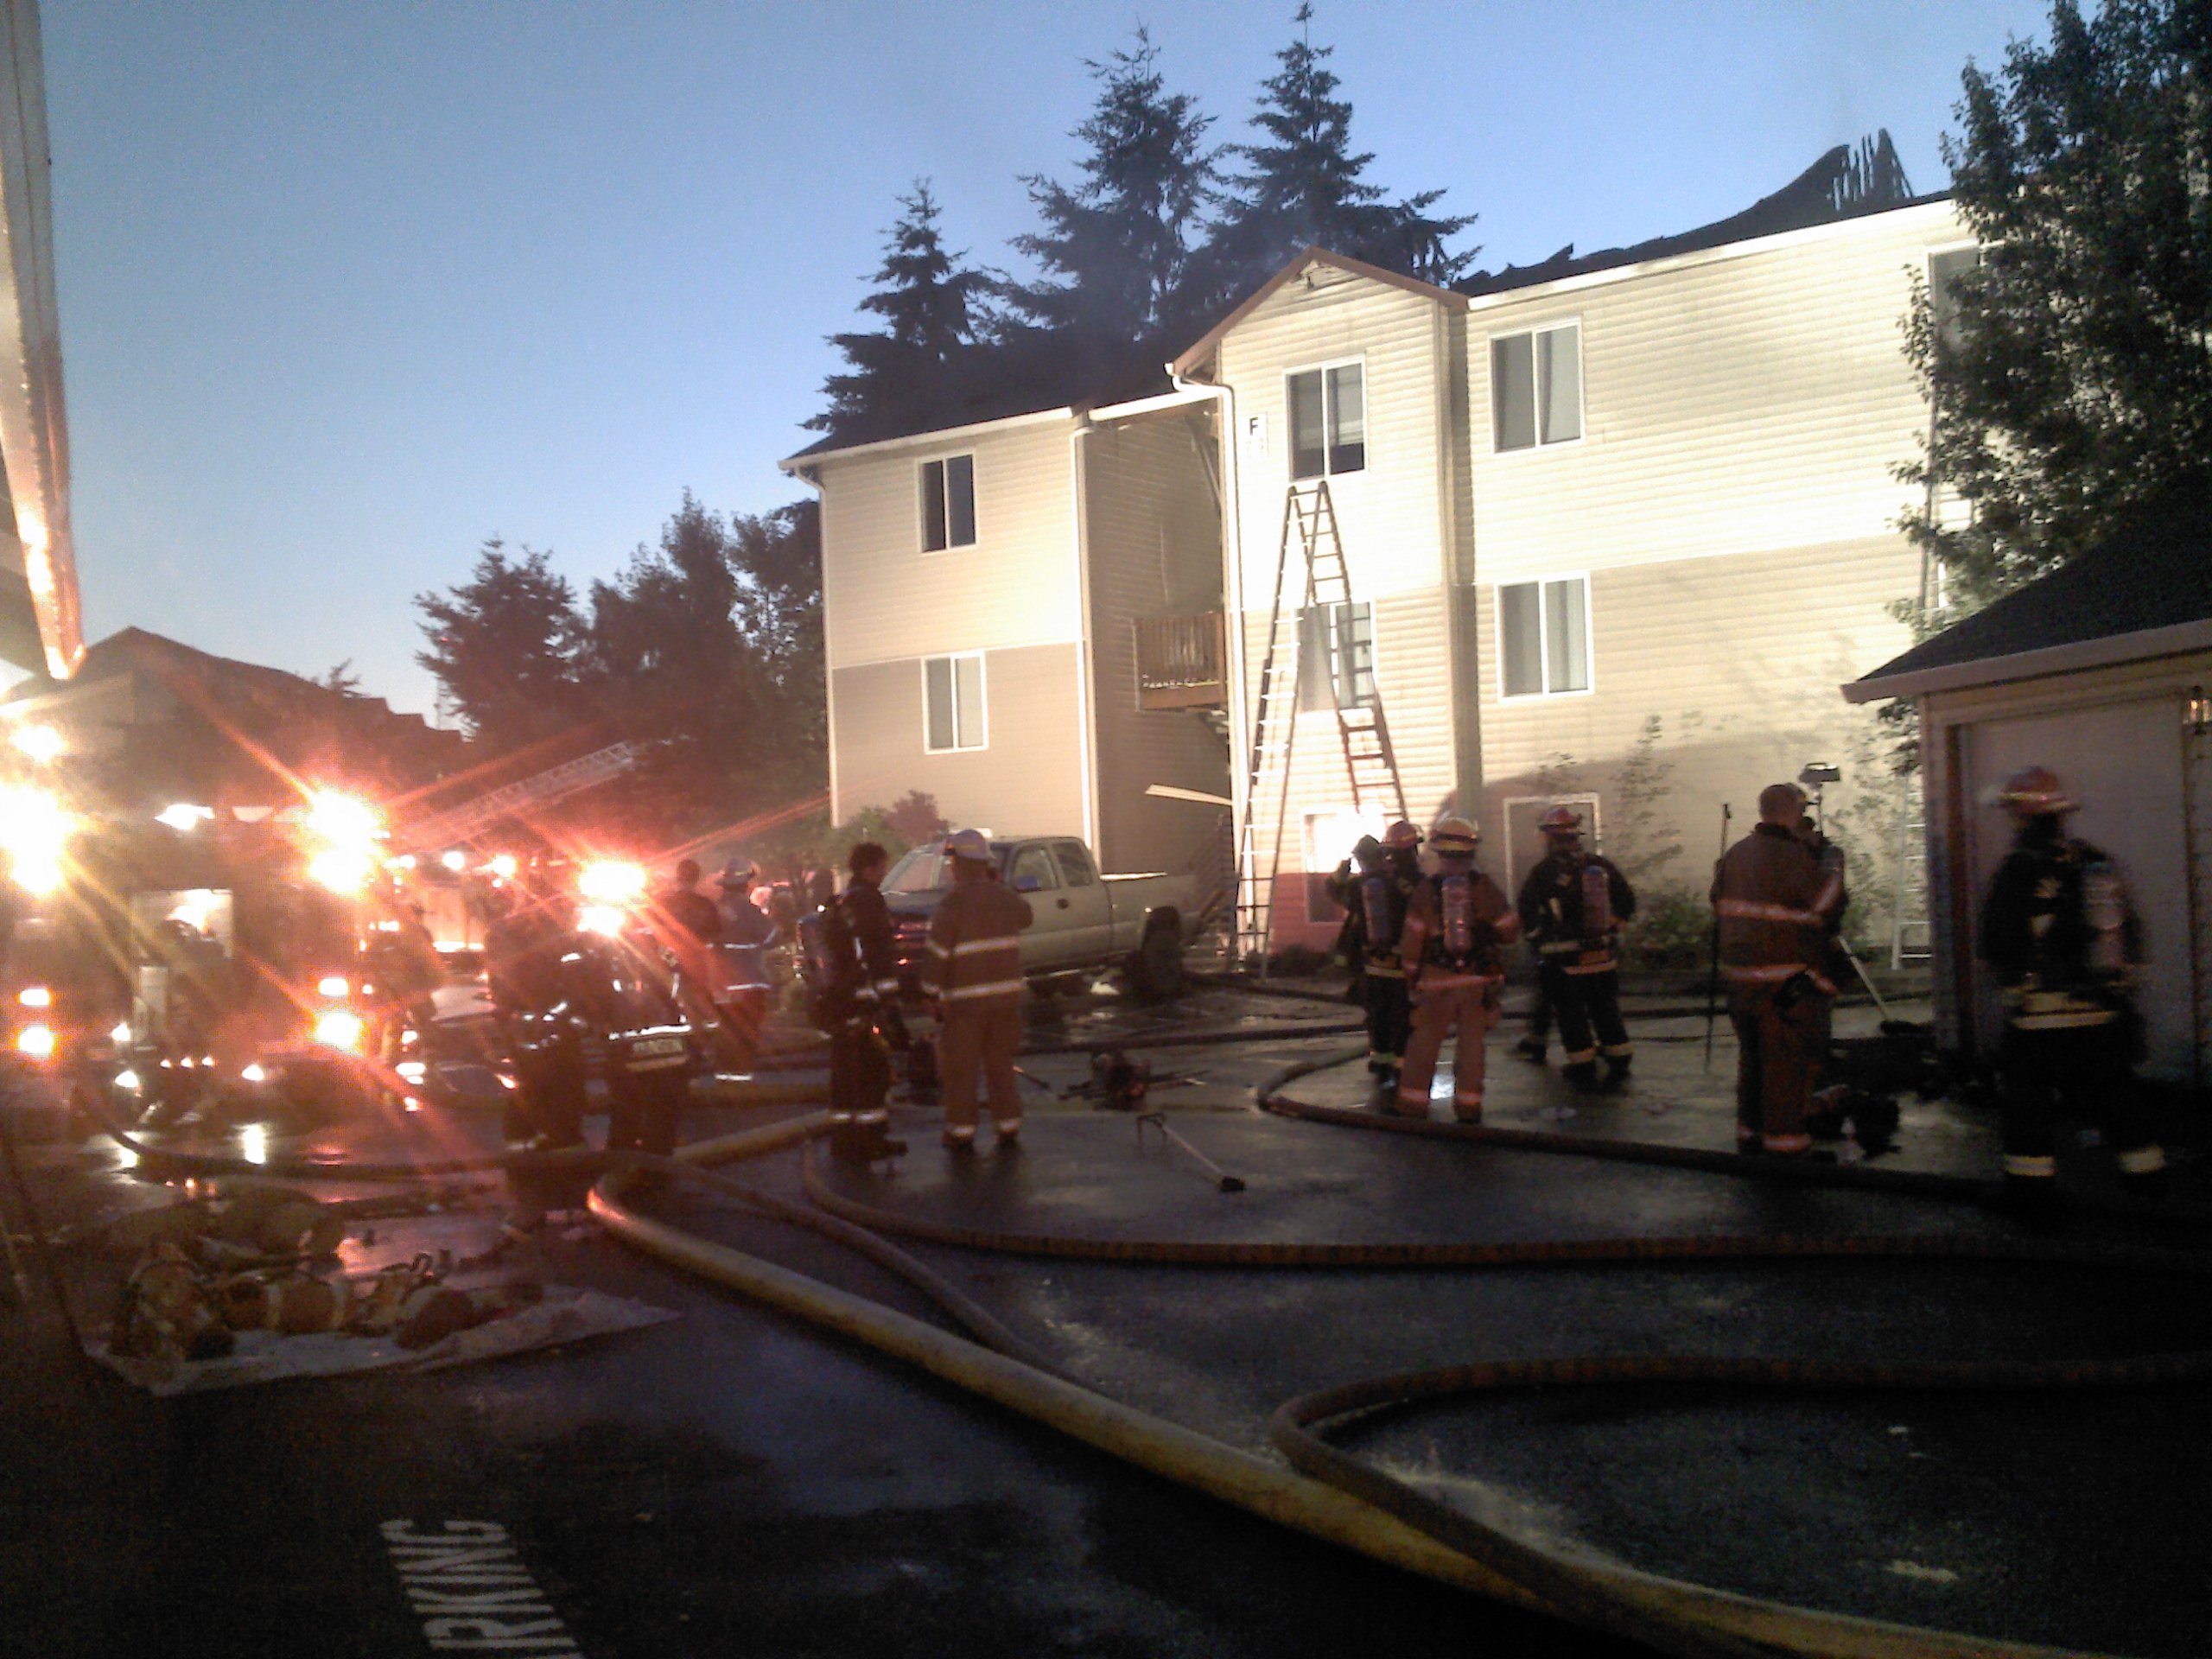 Firefighters remained on scene late Tuesday at the One Lake Place residential complex on Northeast 121st Avenue in Vancouver after one of its buildings burned.